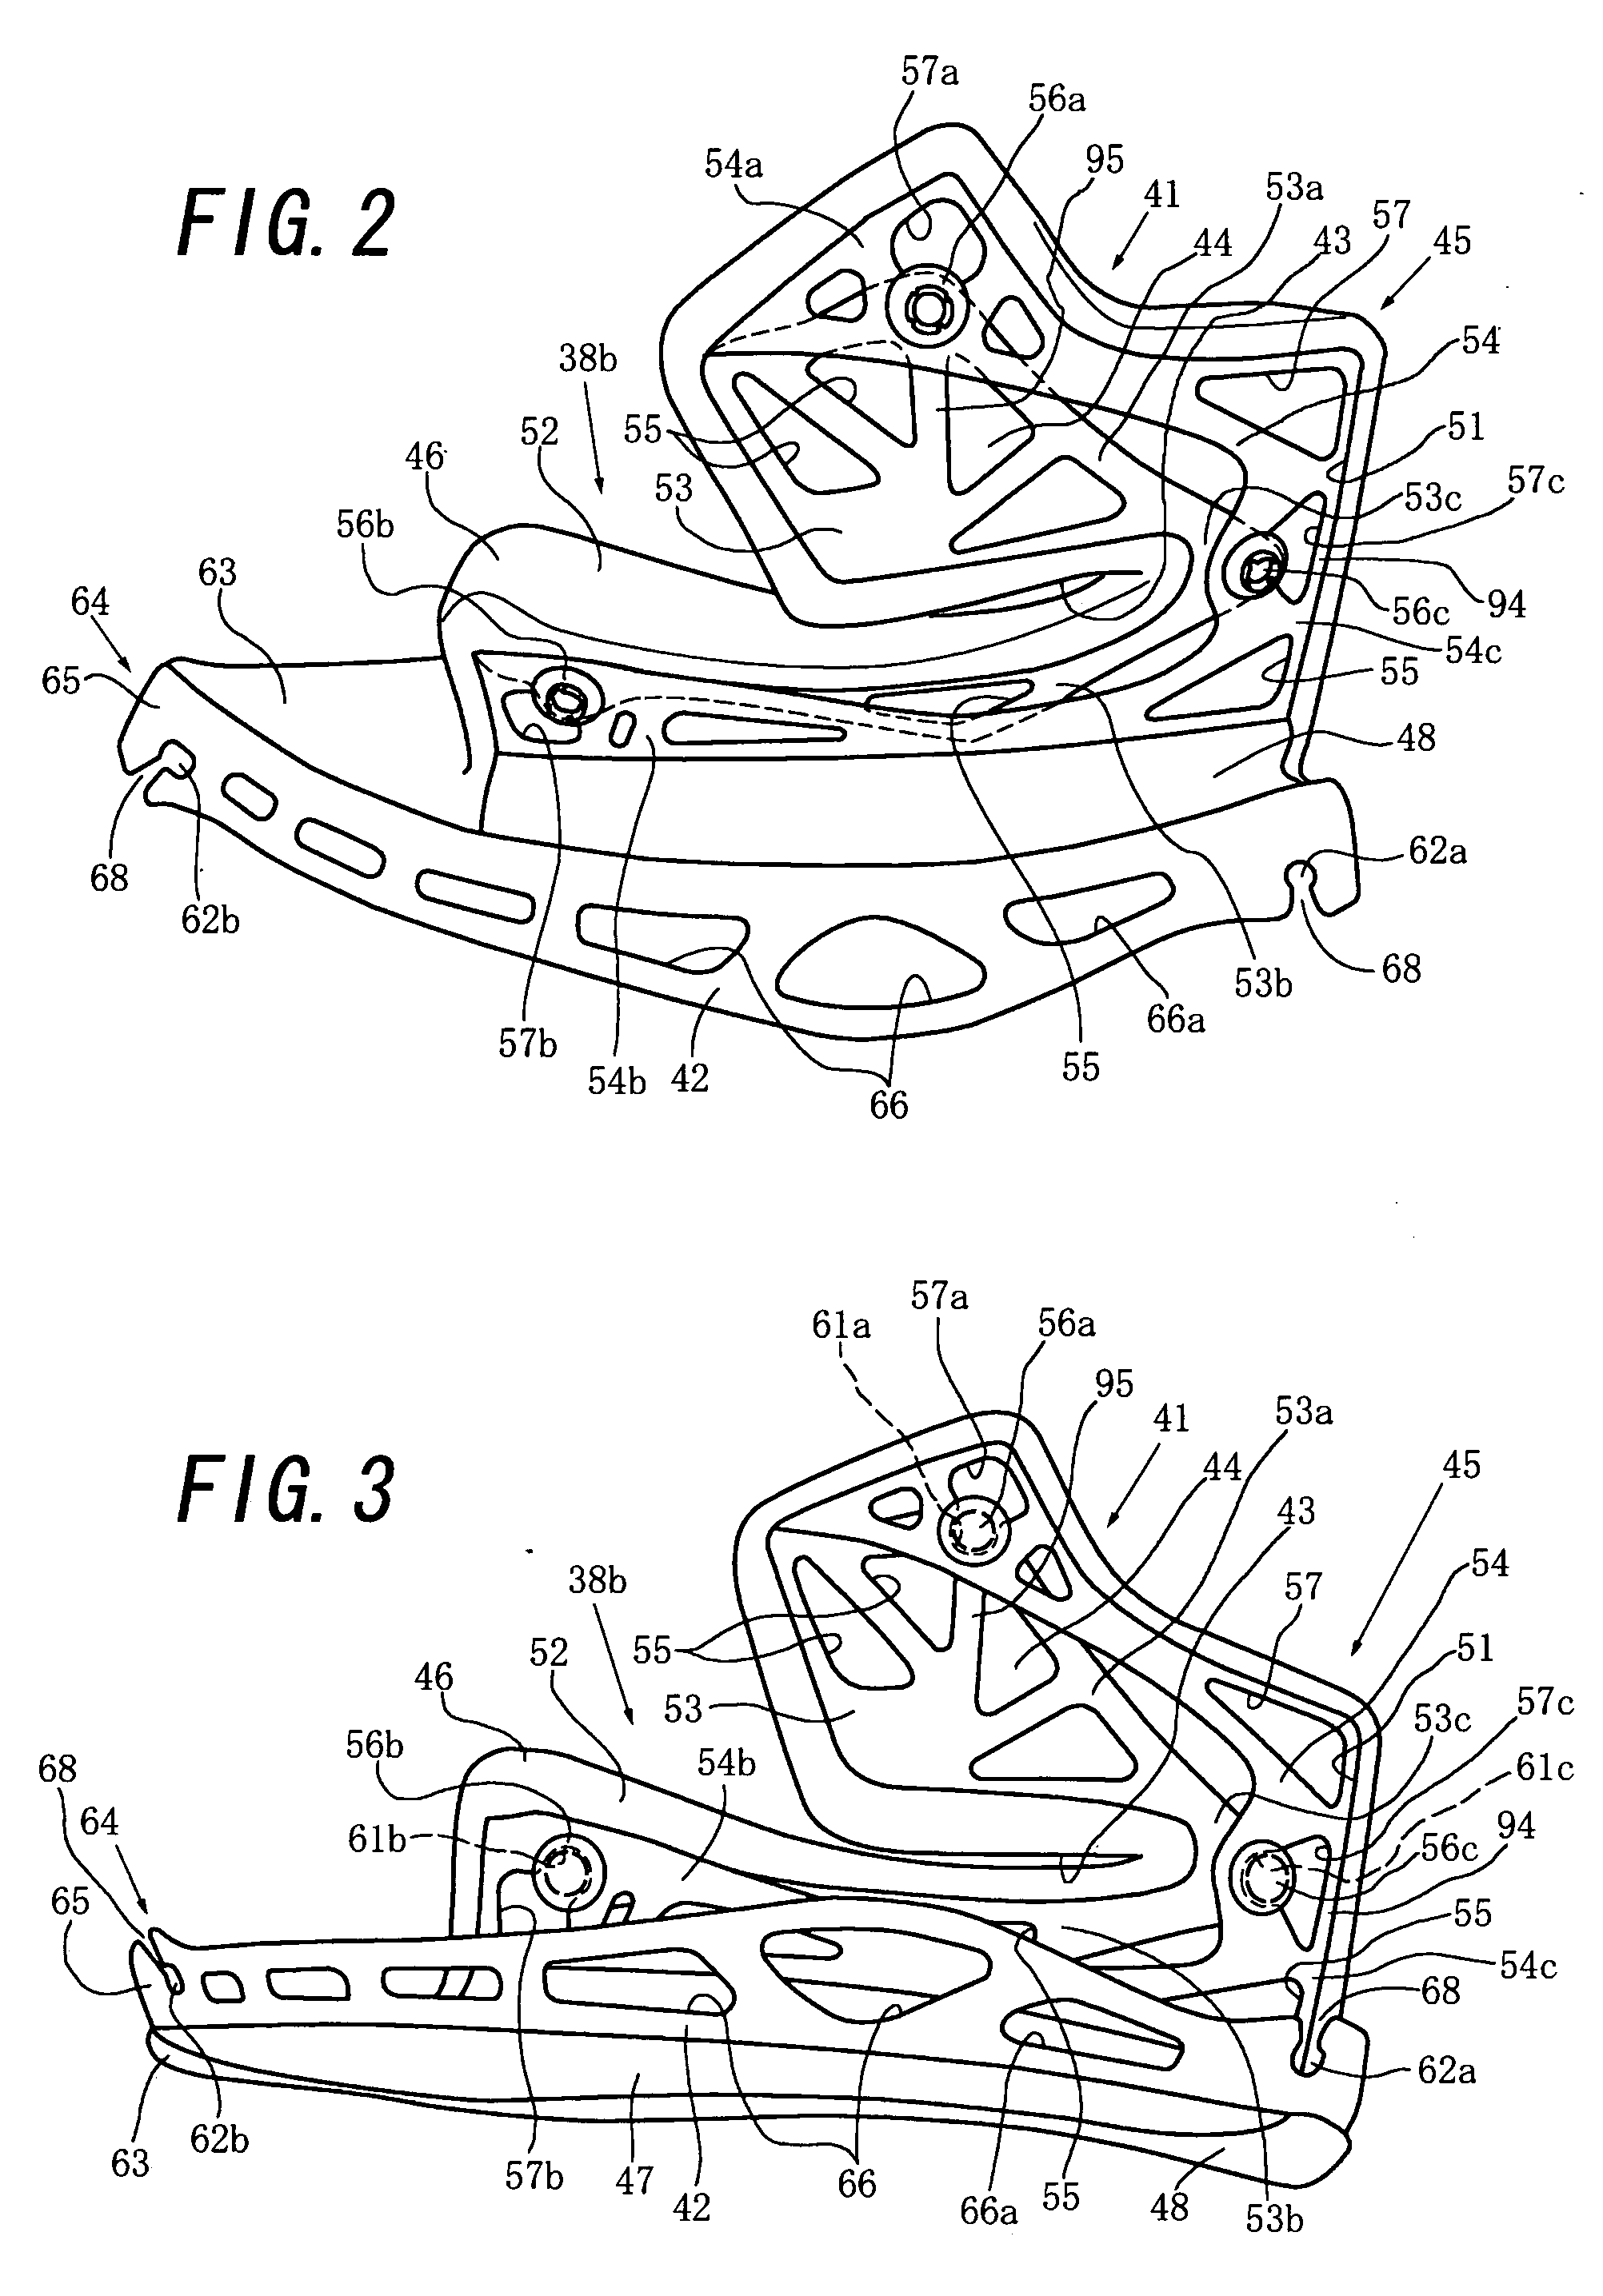 Helmet and method of removing the same